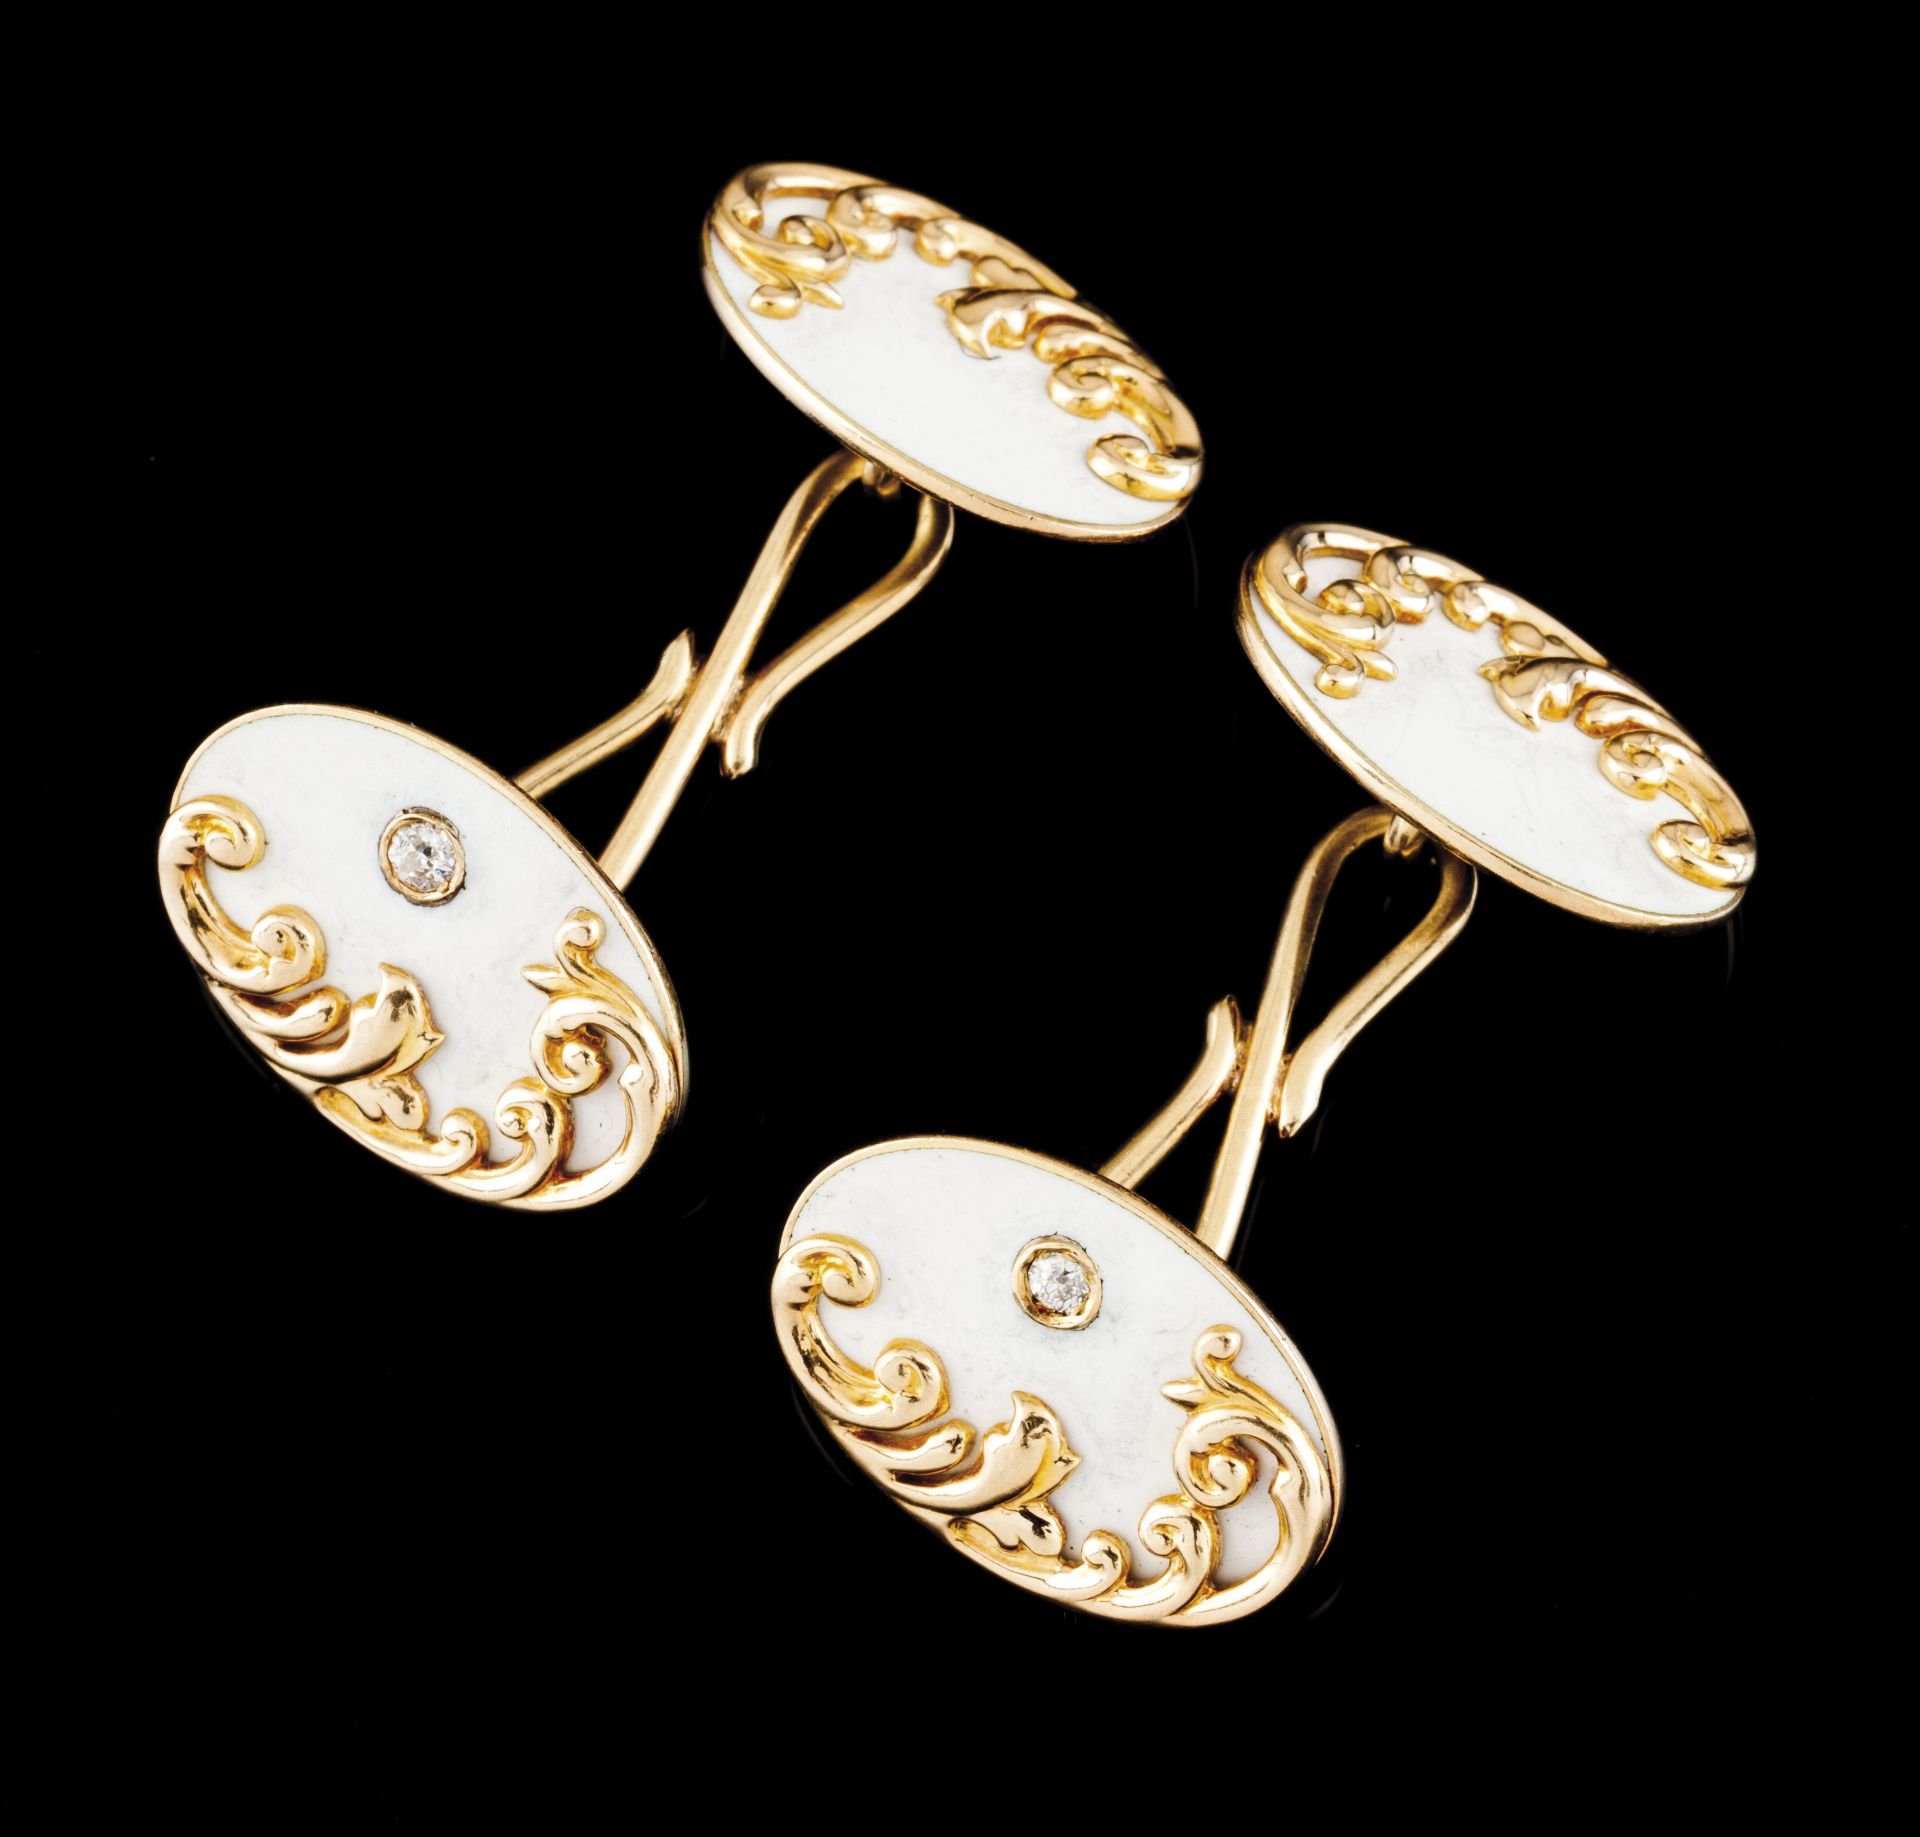 A pair of cufflinksGold 585/1000Oval shaped of white enamelled background and applied raised foliage